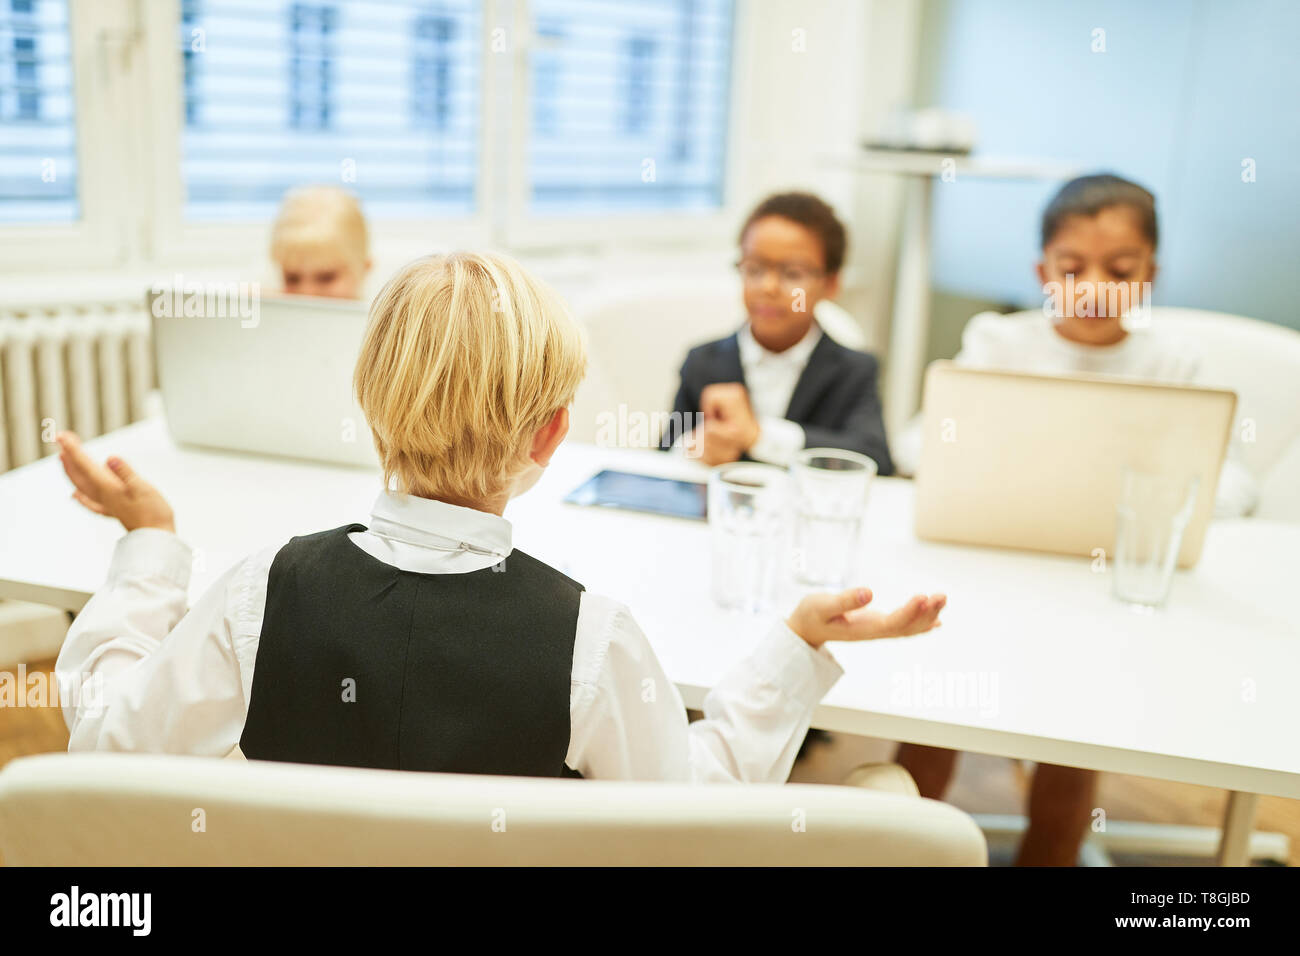 Children as business people and job applicants in a job interview Stock Photo